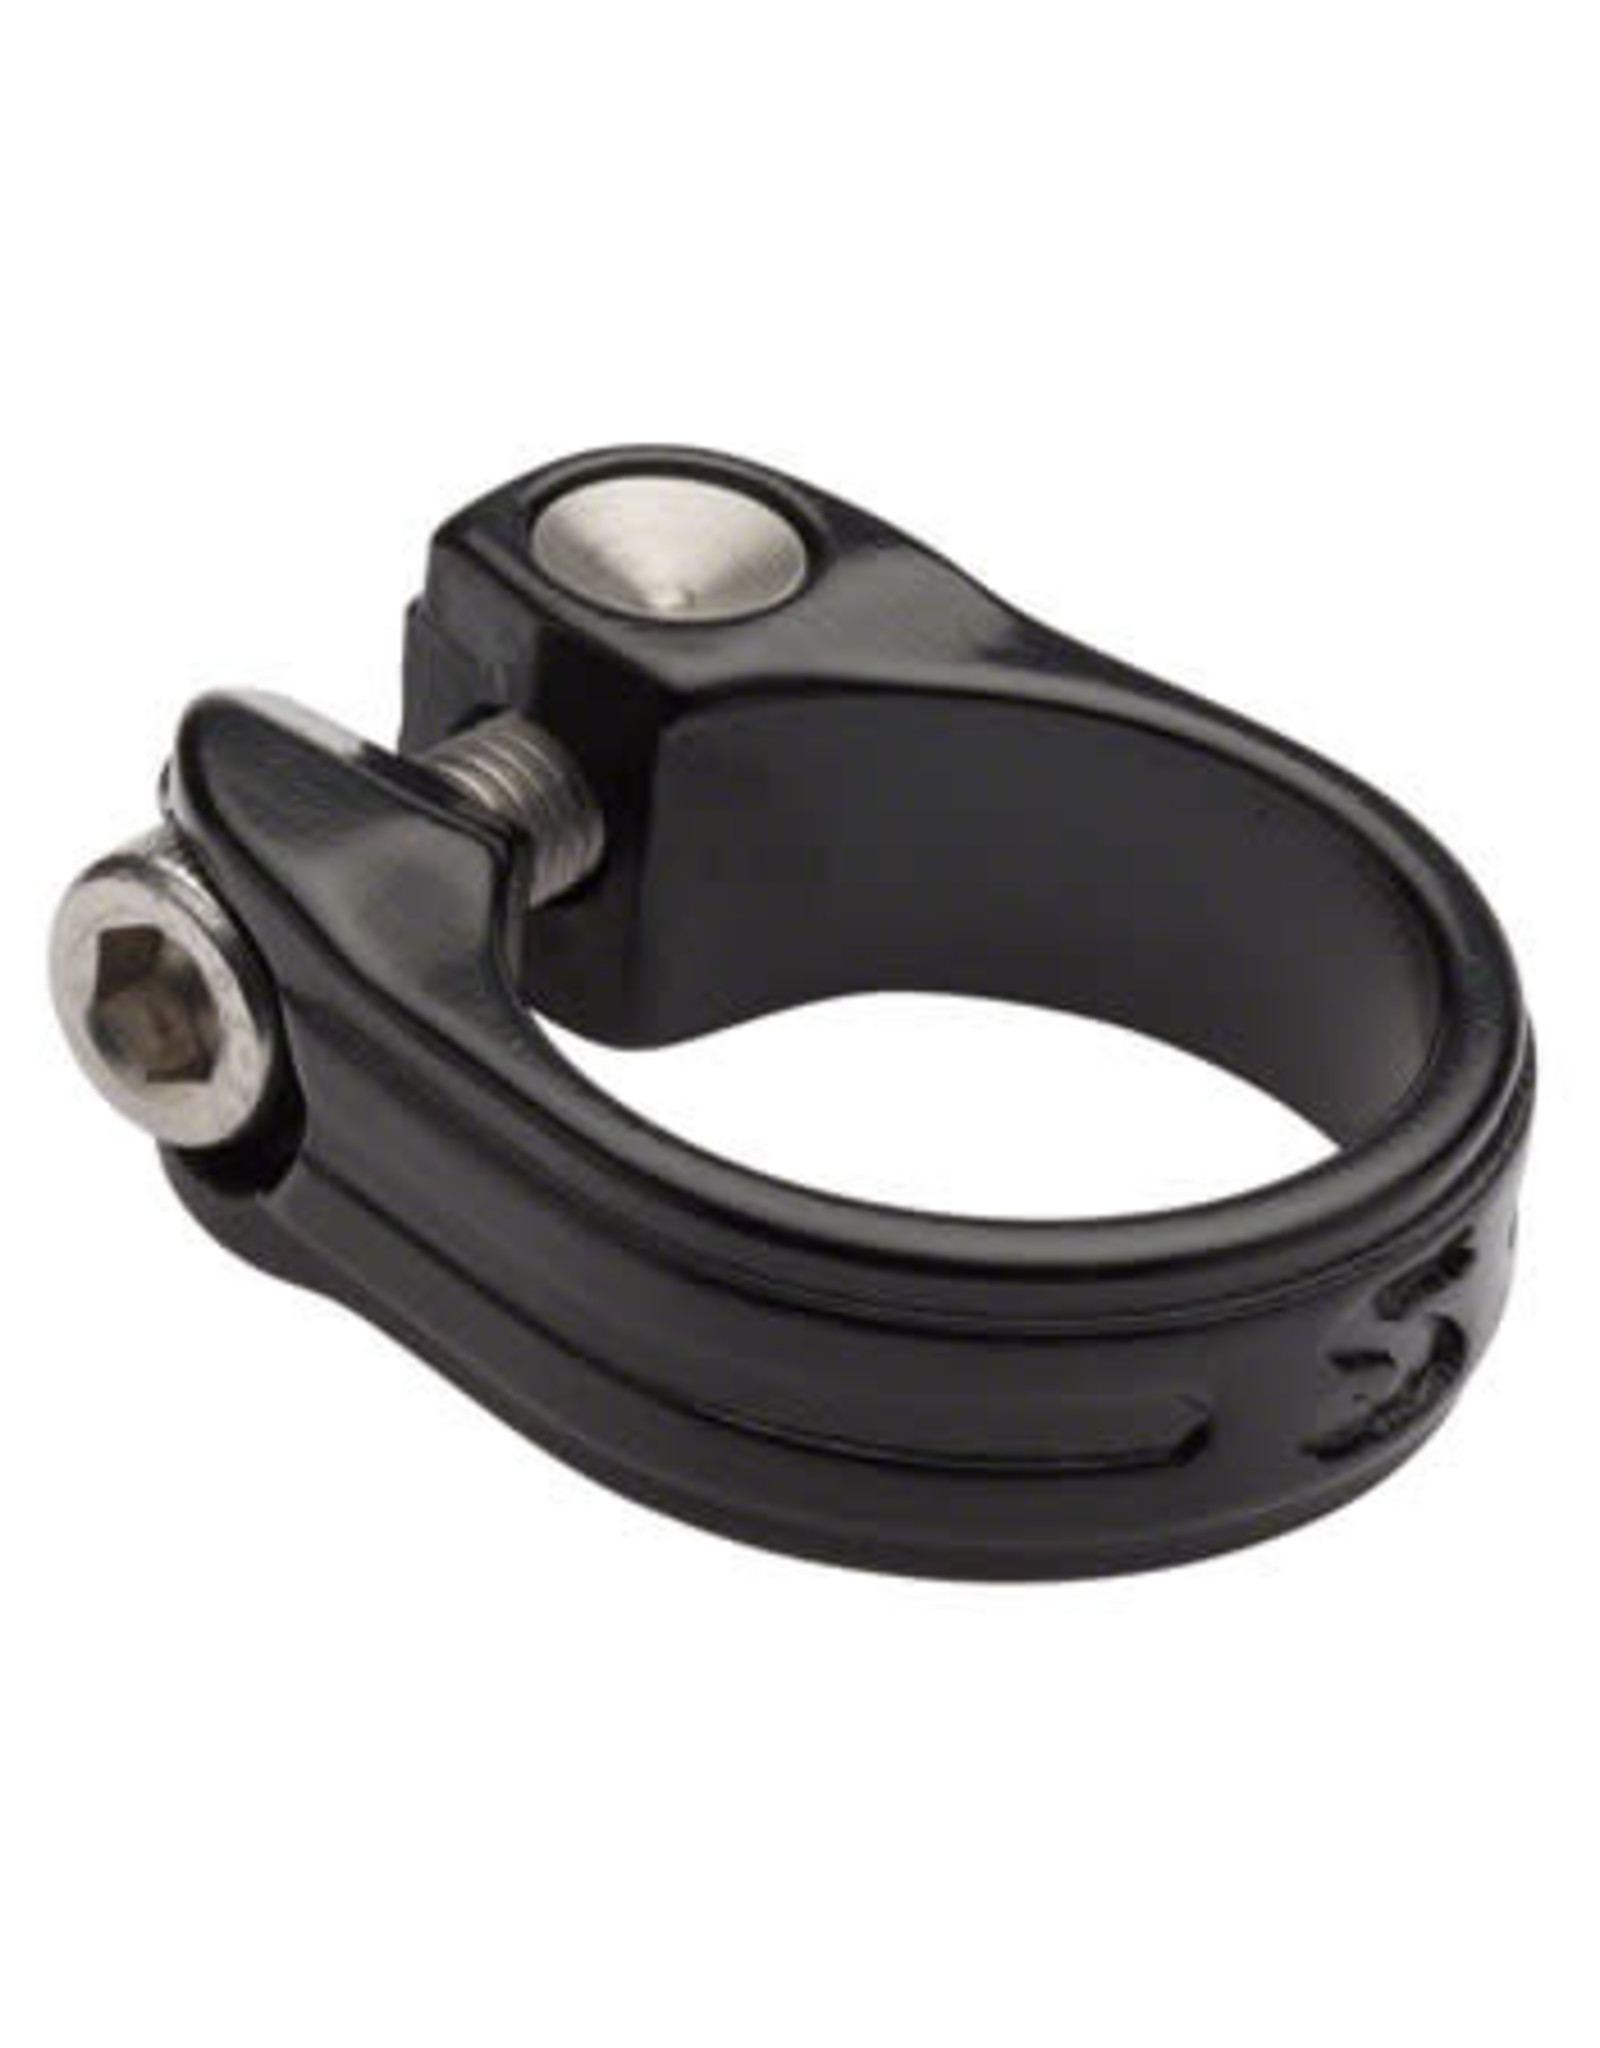 Surly Surly New Stainless Seatpost Clamp 30.0mm Black